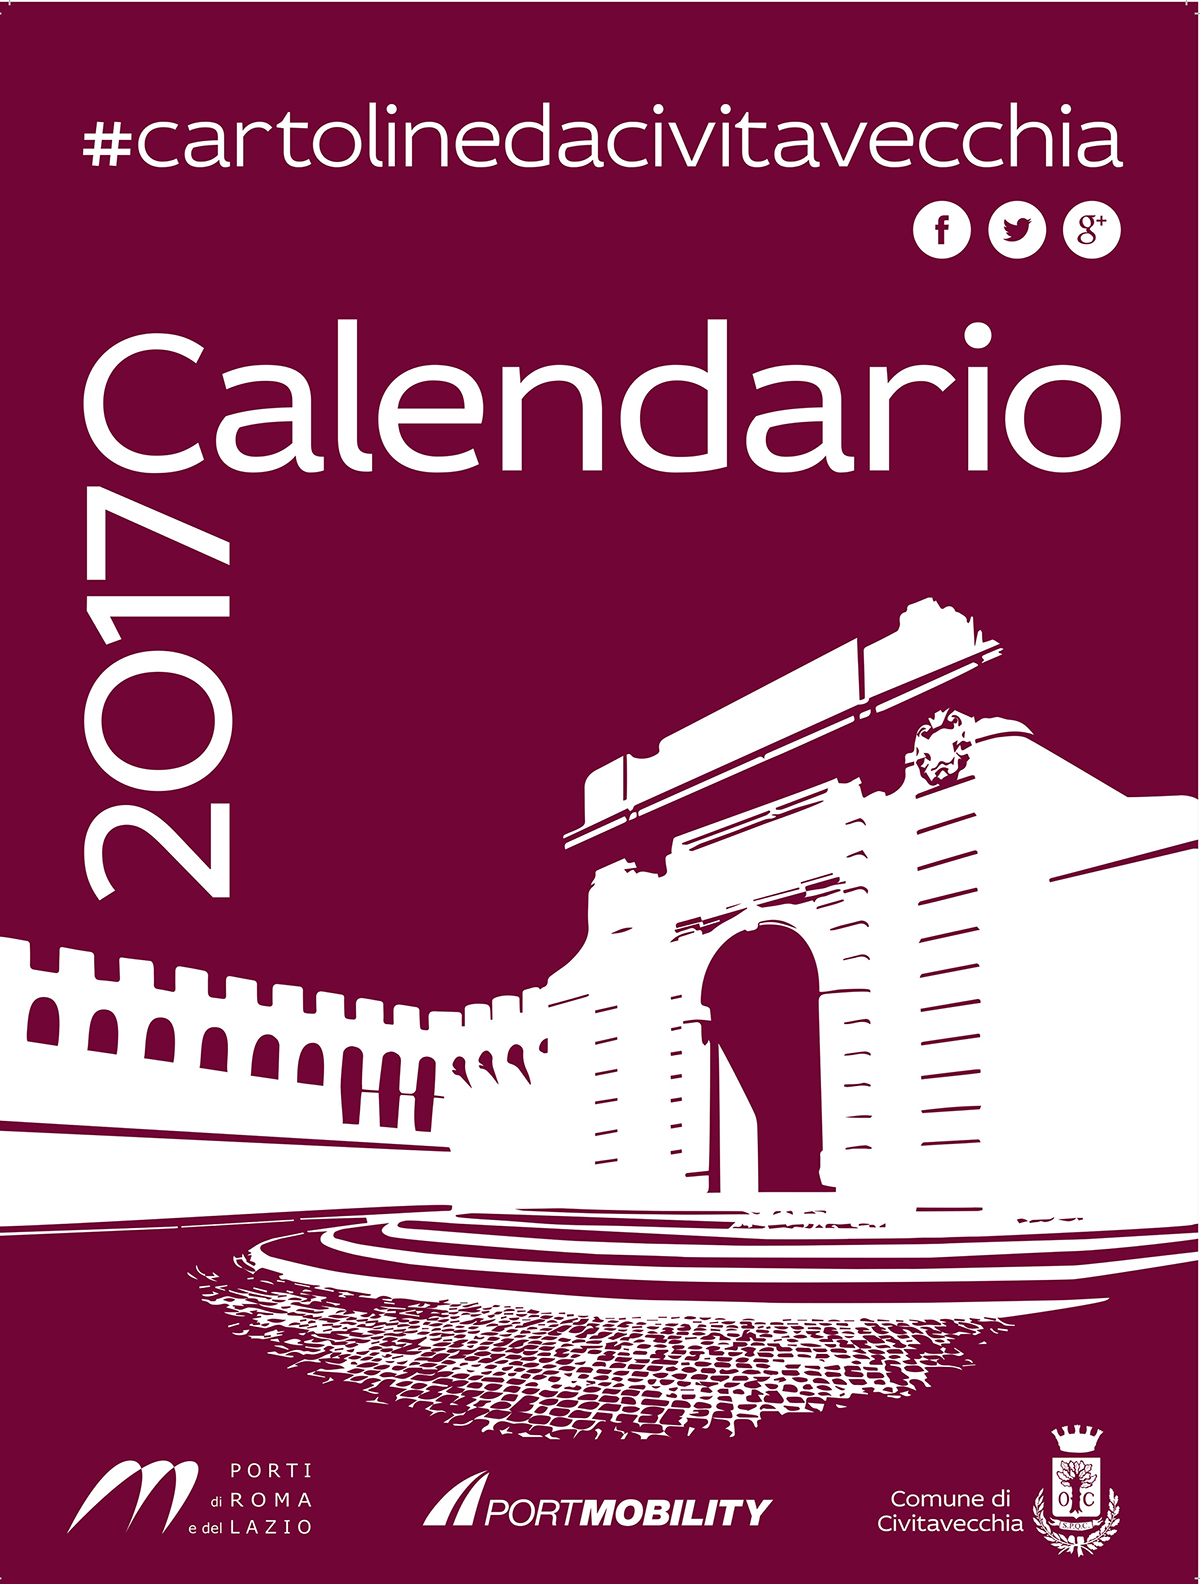 Cover of the calendar 2017 of Postcards from Civitavecchia